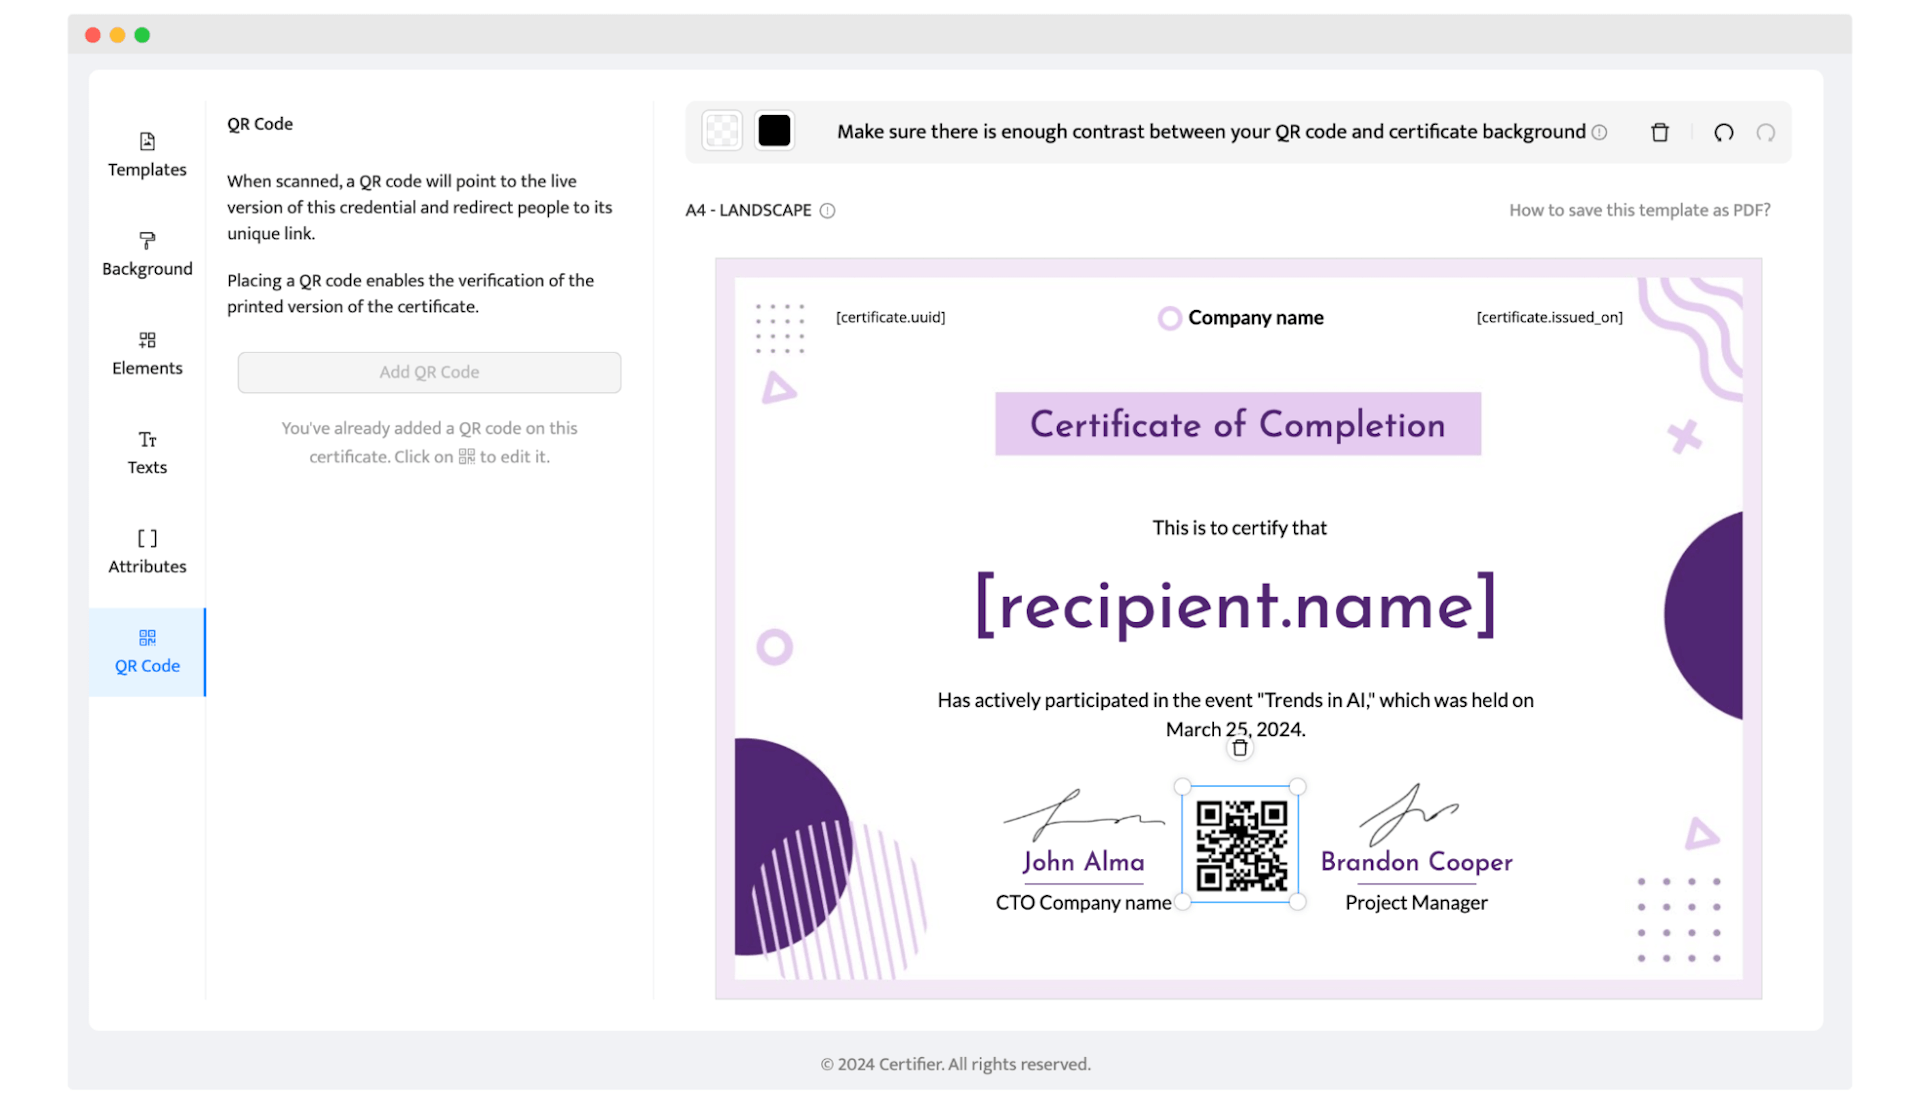 Generating a QR code to the certificate design via the Certifier tool.